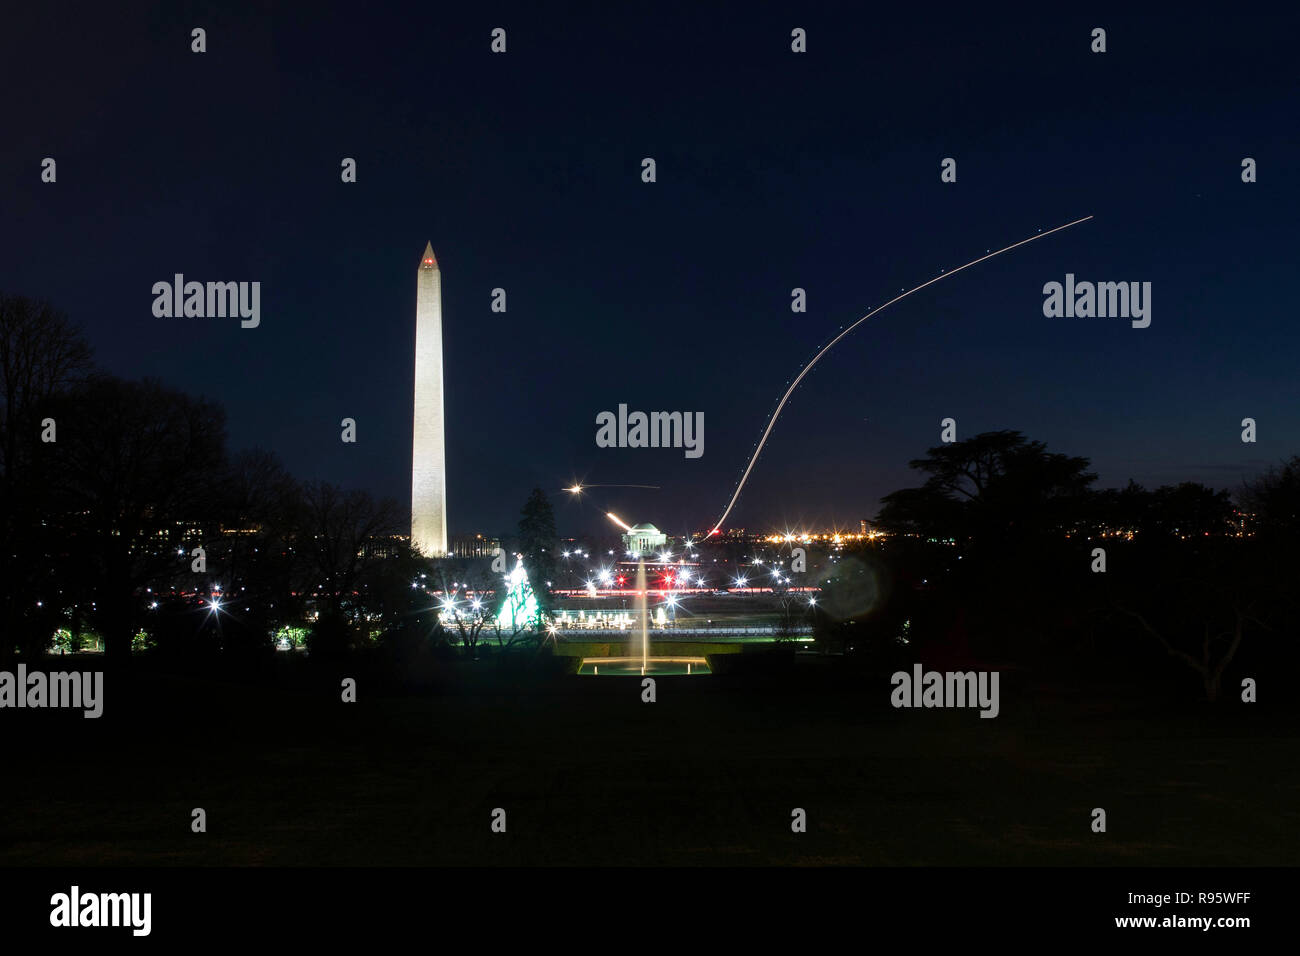 View of the Washington Monument and National Mall from the South Lawn of the White House decorated for Christmas and lighted at night December 12, 2018 in Washington, DC. The light streaks are commercial airplanes taking off from Reagan National Airport on the Potomac River. Stock Photo